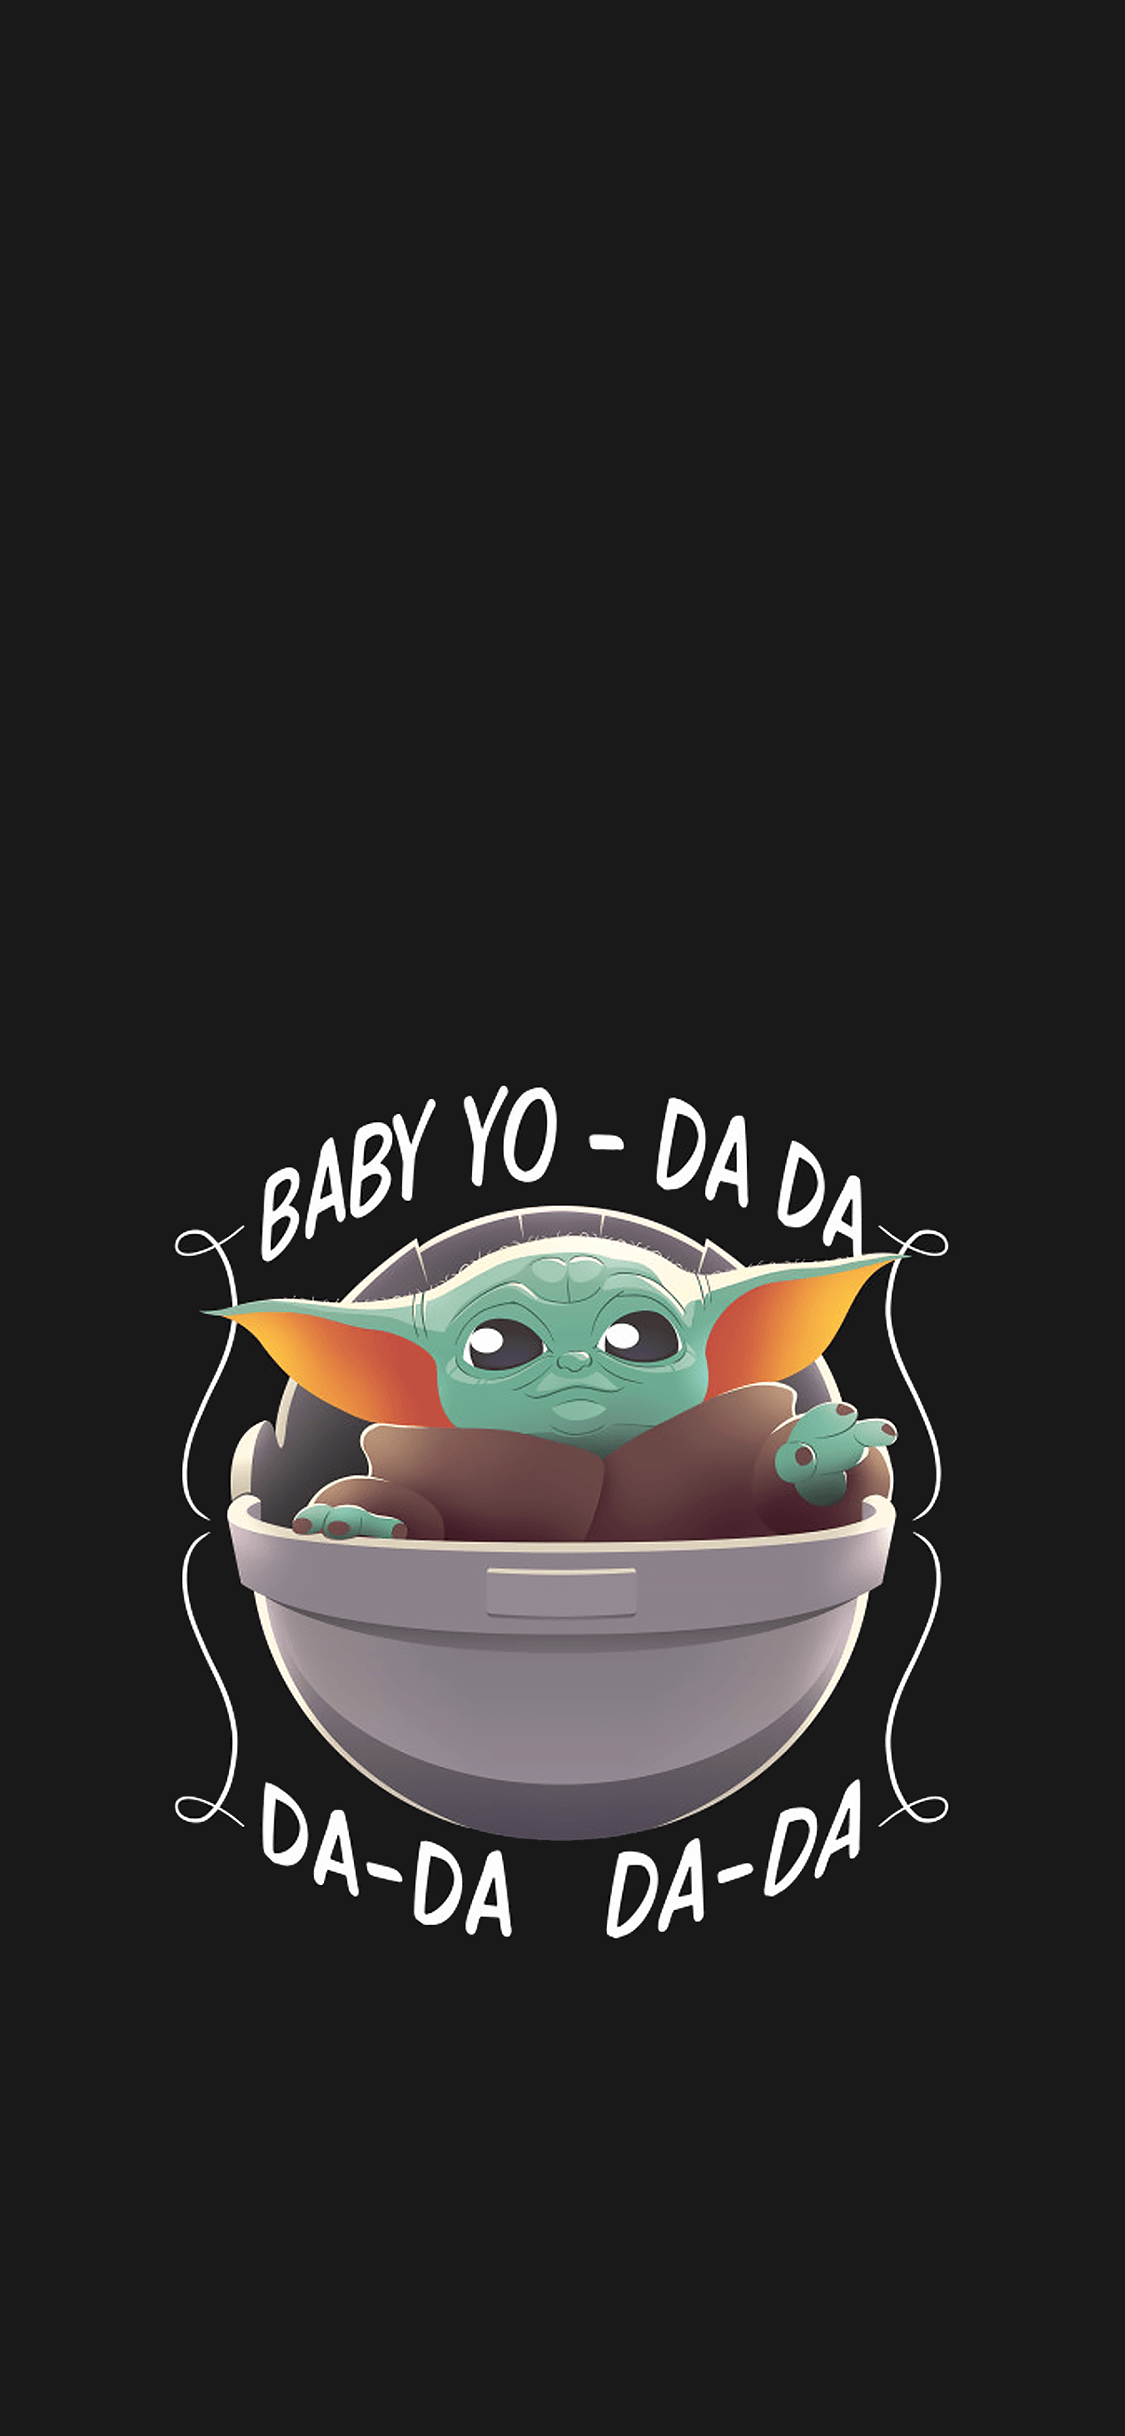 Found Baby Yoda and made it mobile friendly :)